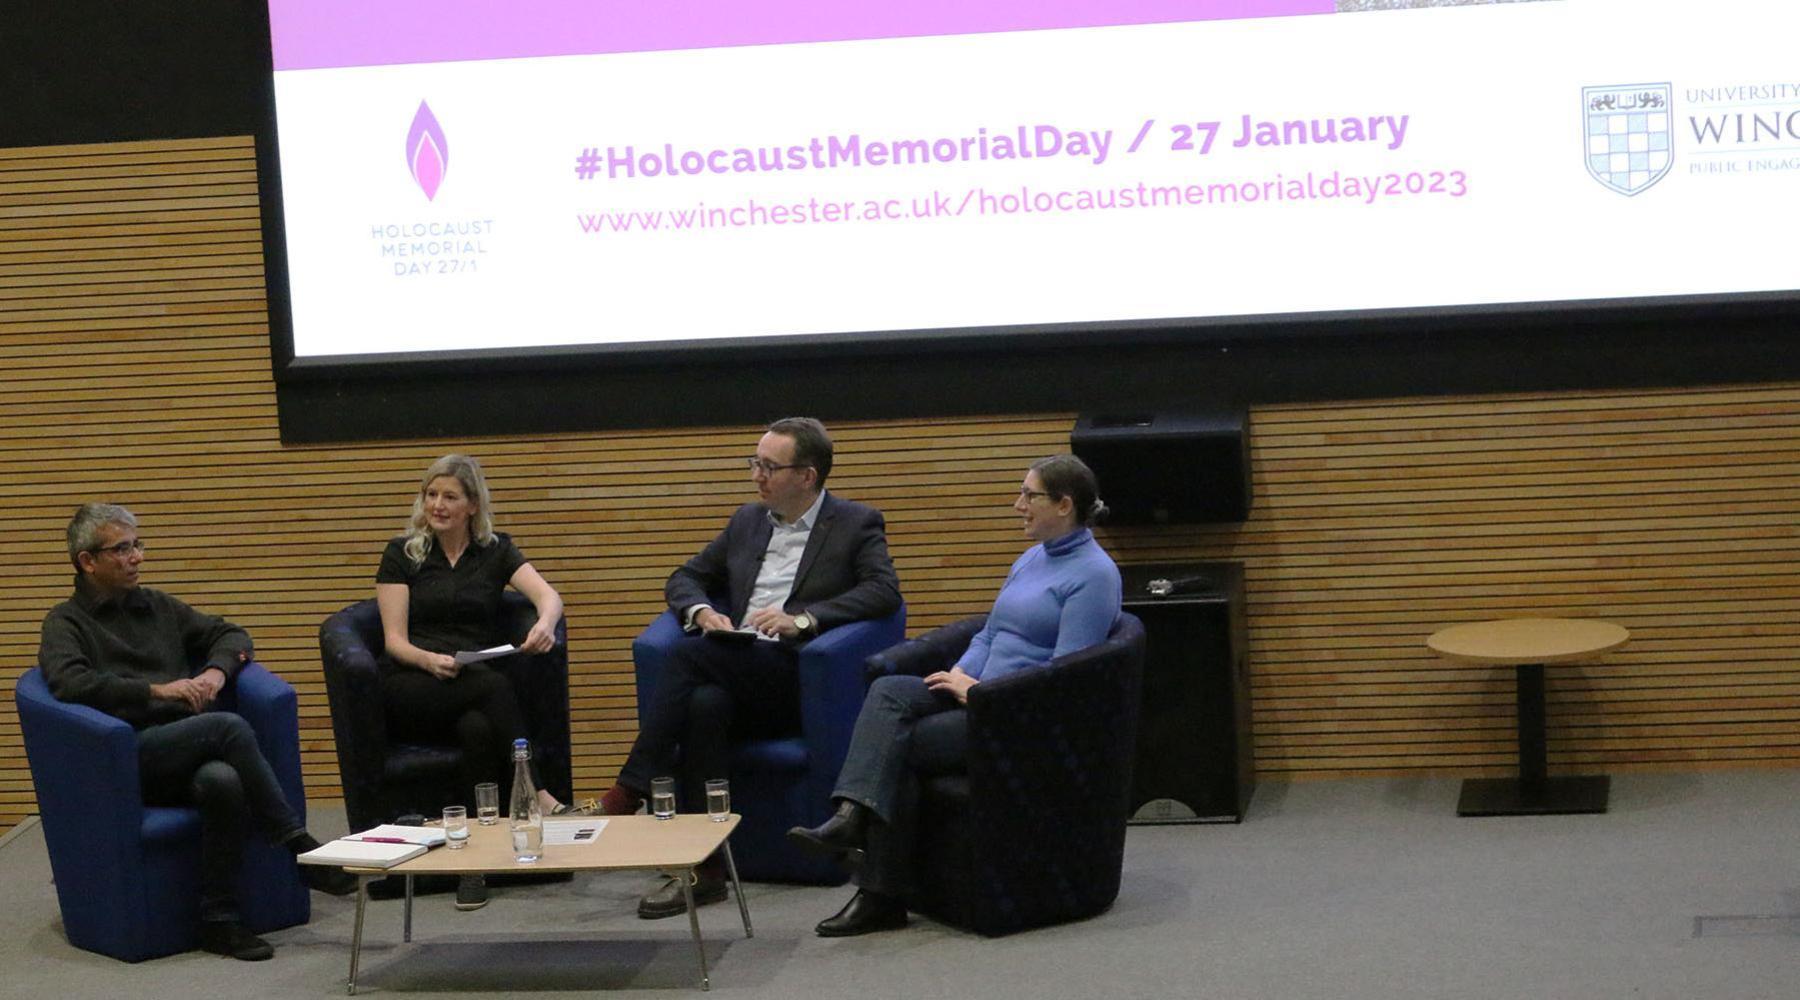 four people seated on a stage talking, in front of an image saying Holocaust Memorial Day 2023